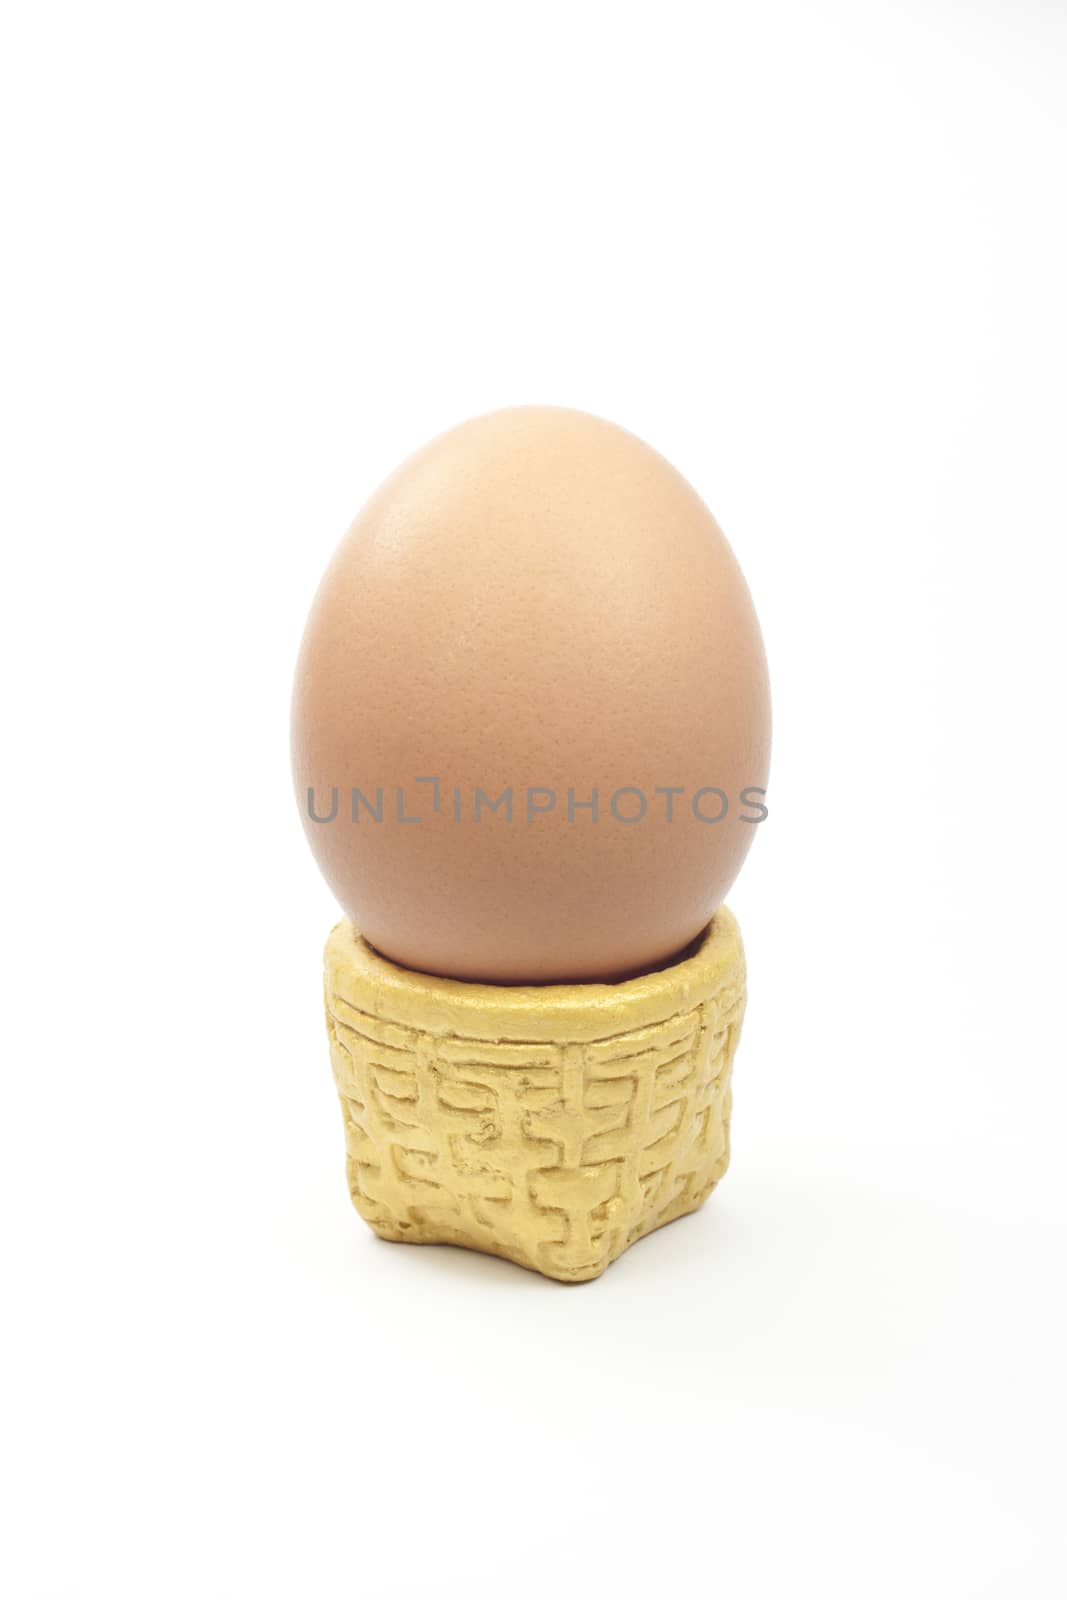 egg by audfriday13